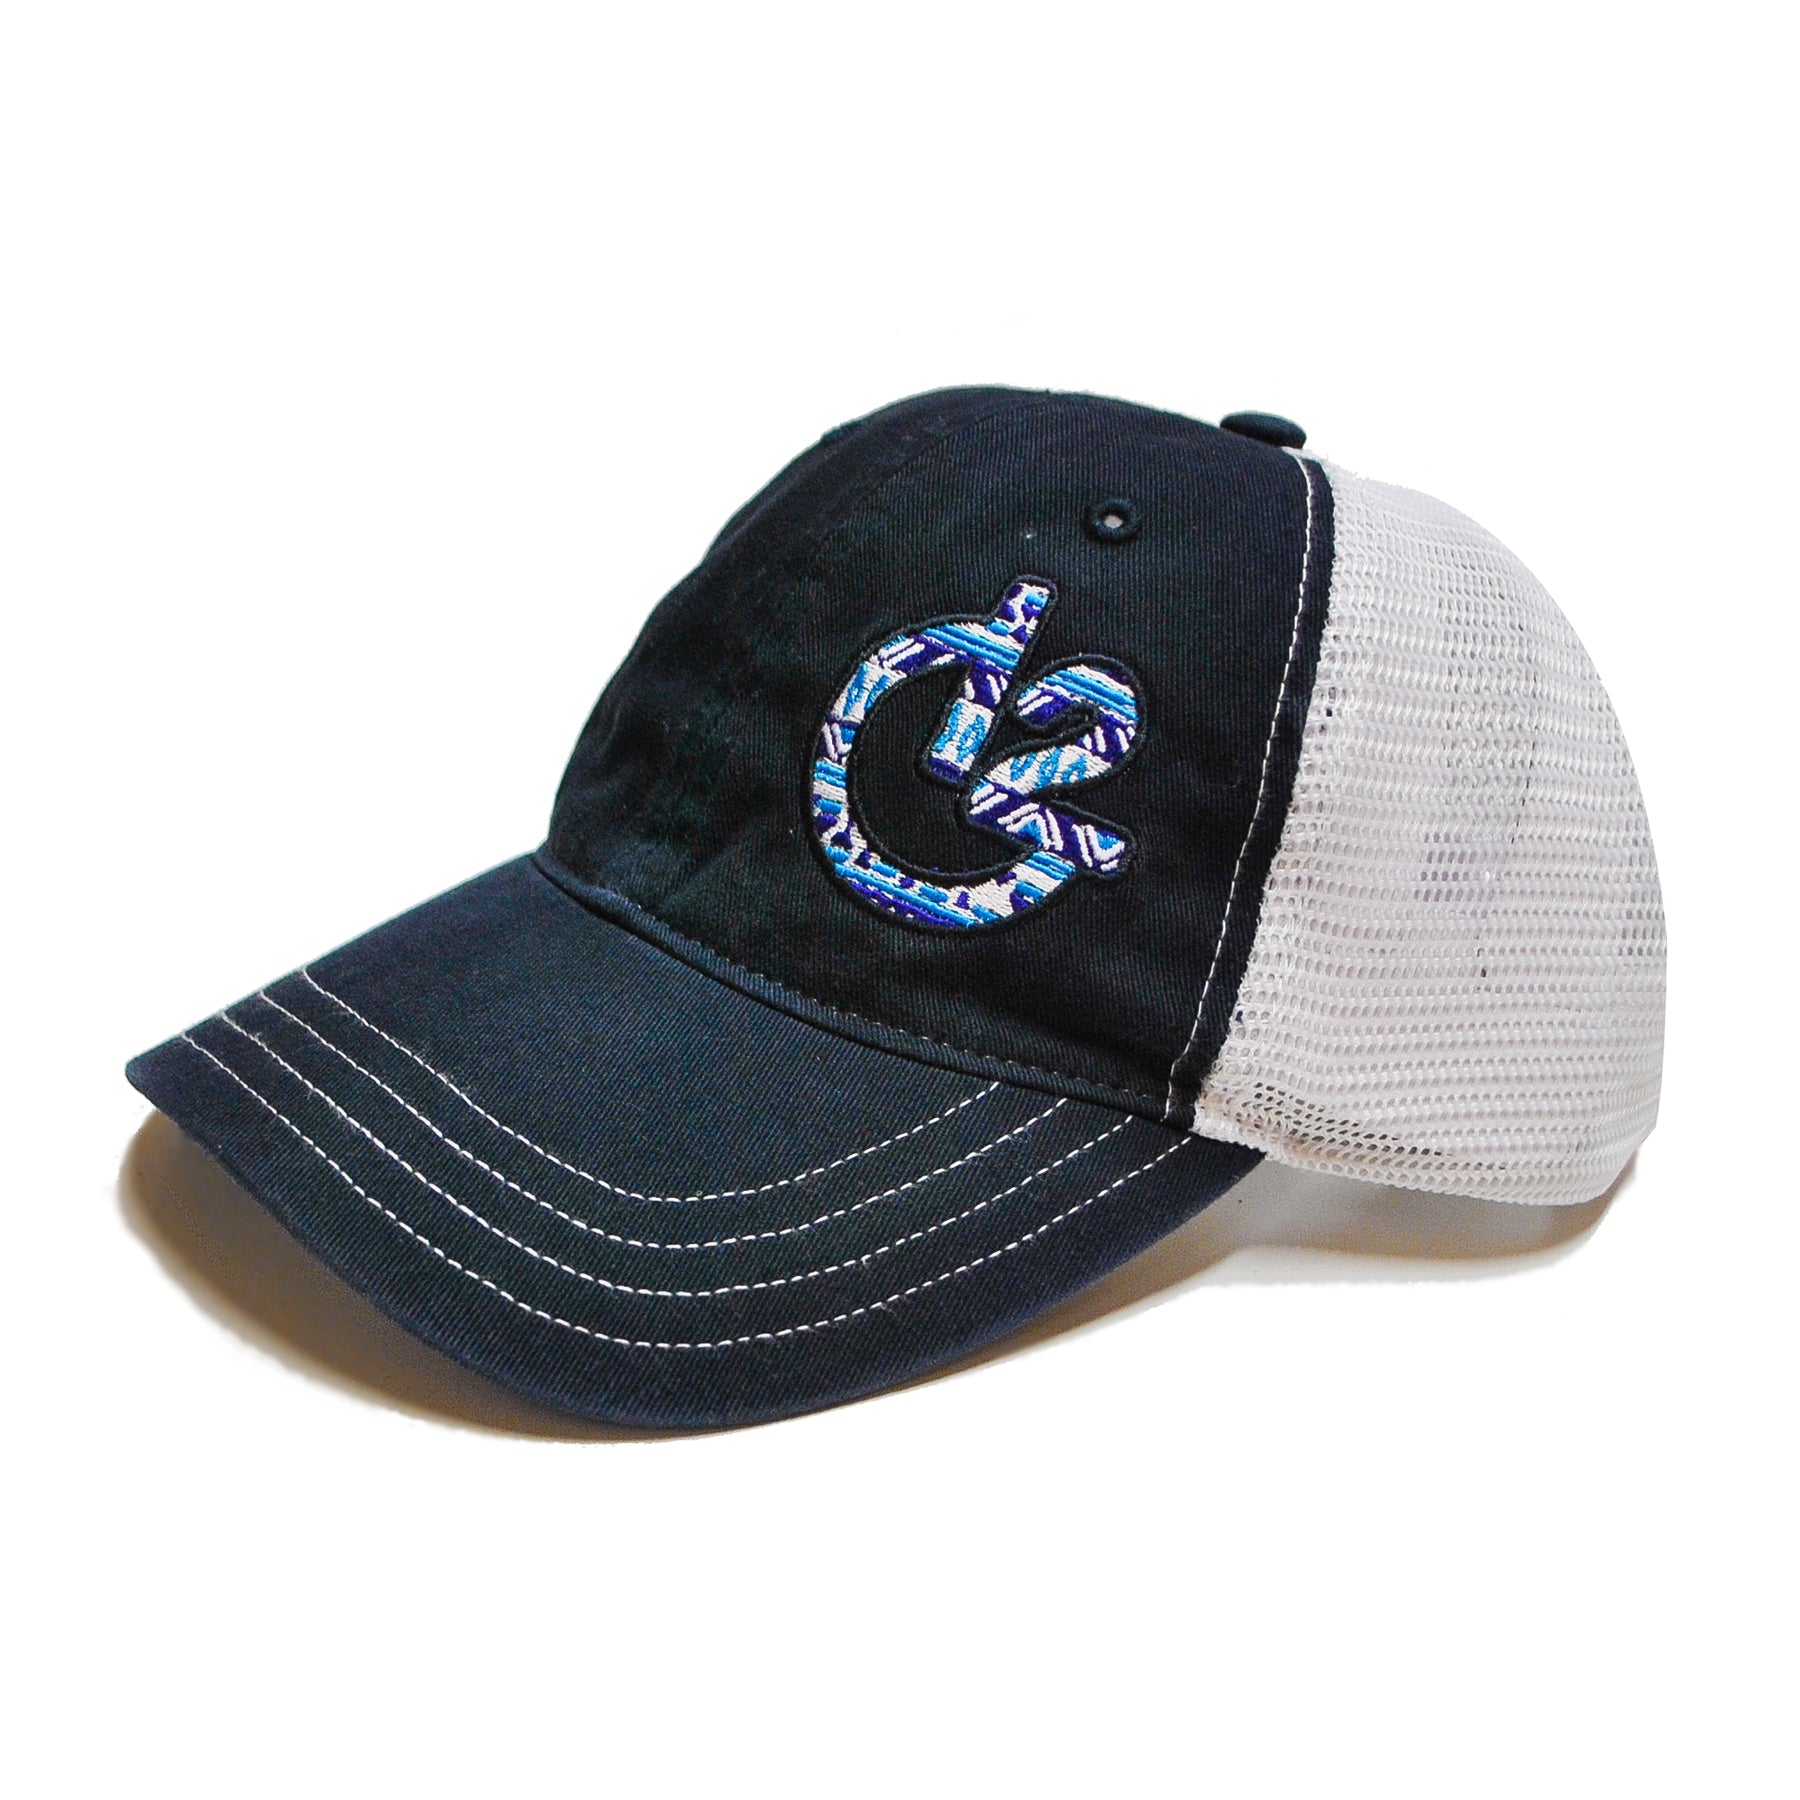 12 Gauge Ranch Aztec Navy and White Low Profile Baseball Hat, Hats, 12 Gauge Ranch, 12 Gauge Ranch Ranch  12 Gauge Ranch